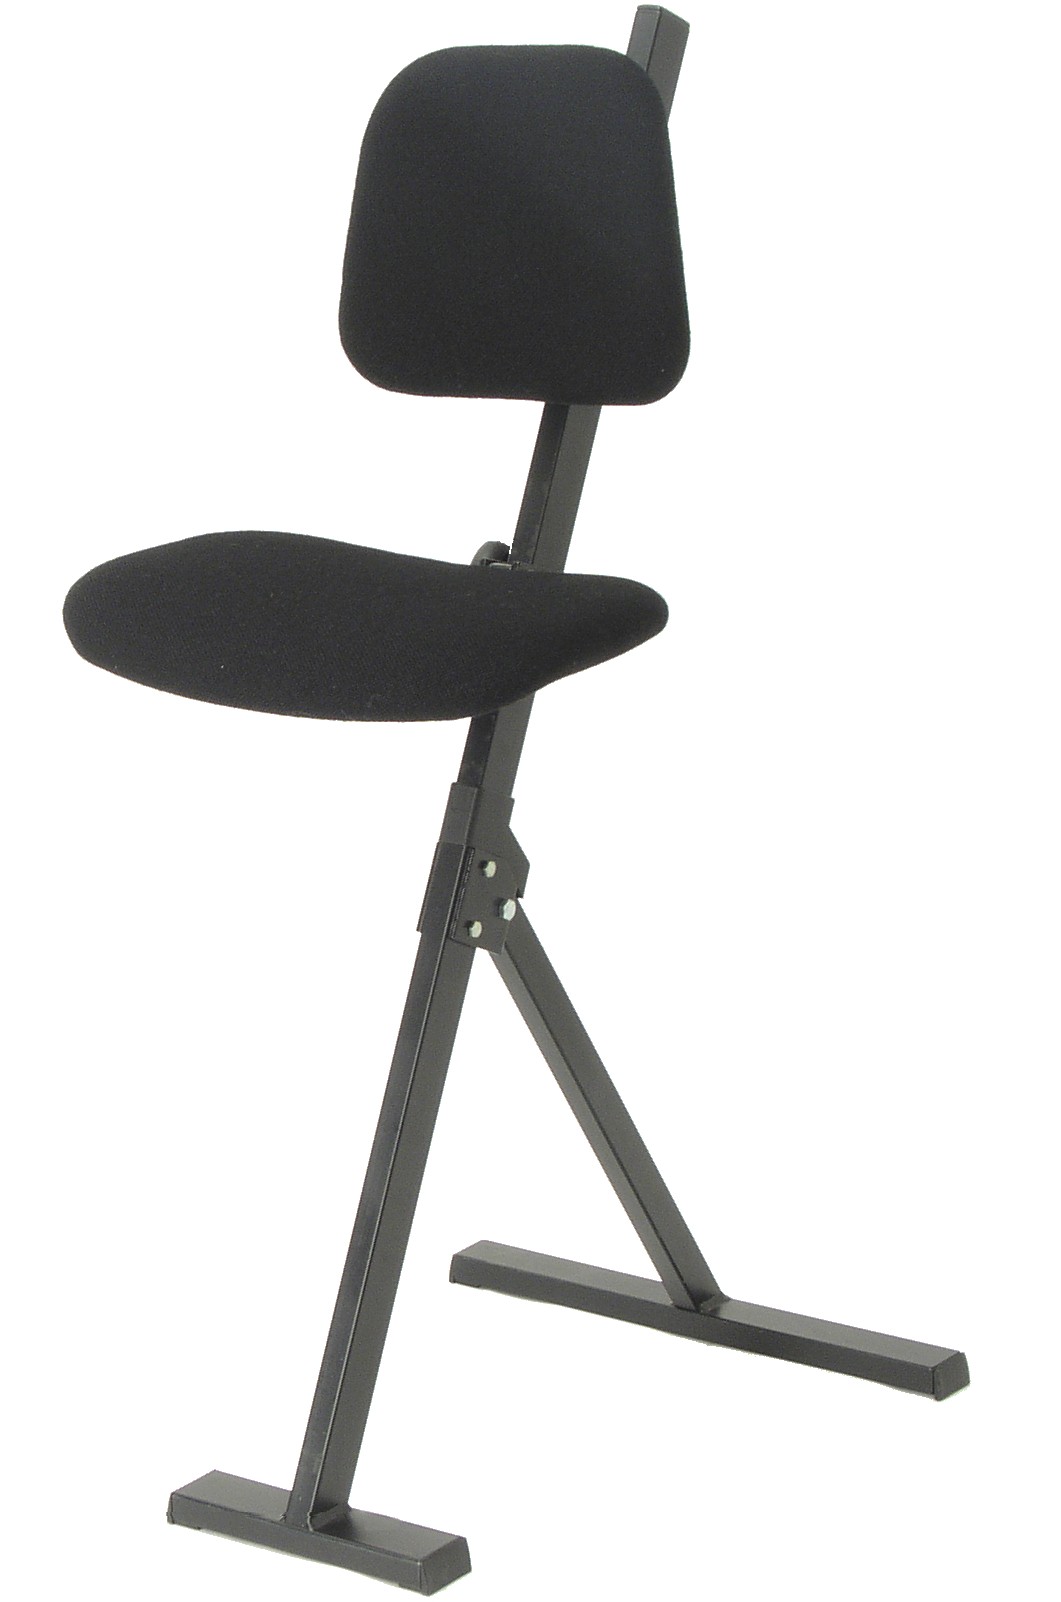 stand up chair standing support chair global